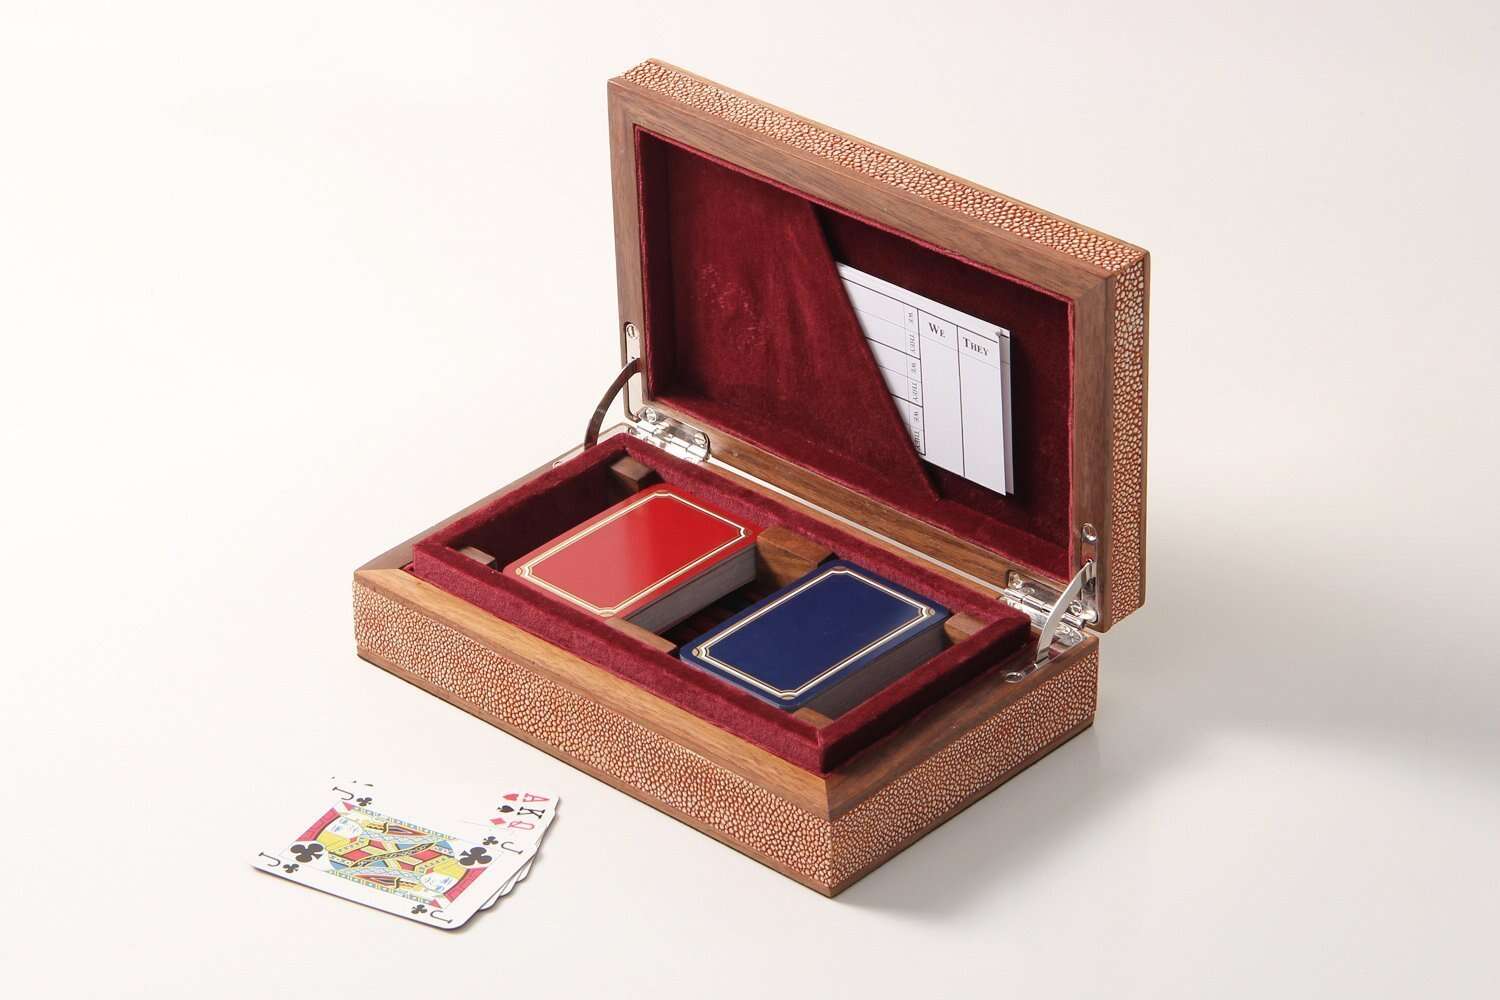 Our coral shagreen bridge set comes with quality playing cards